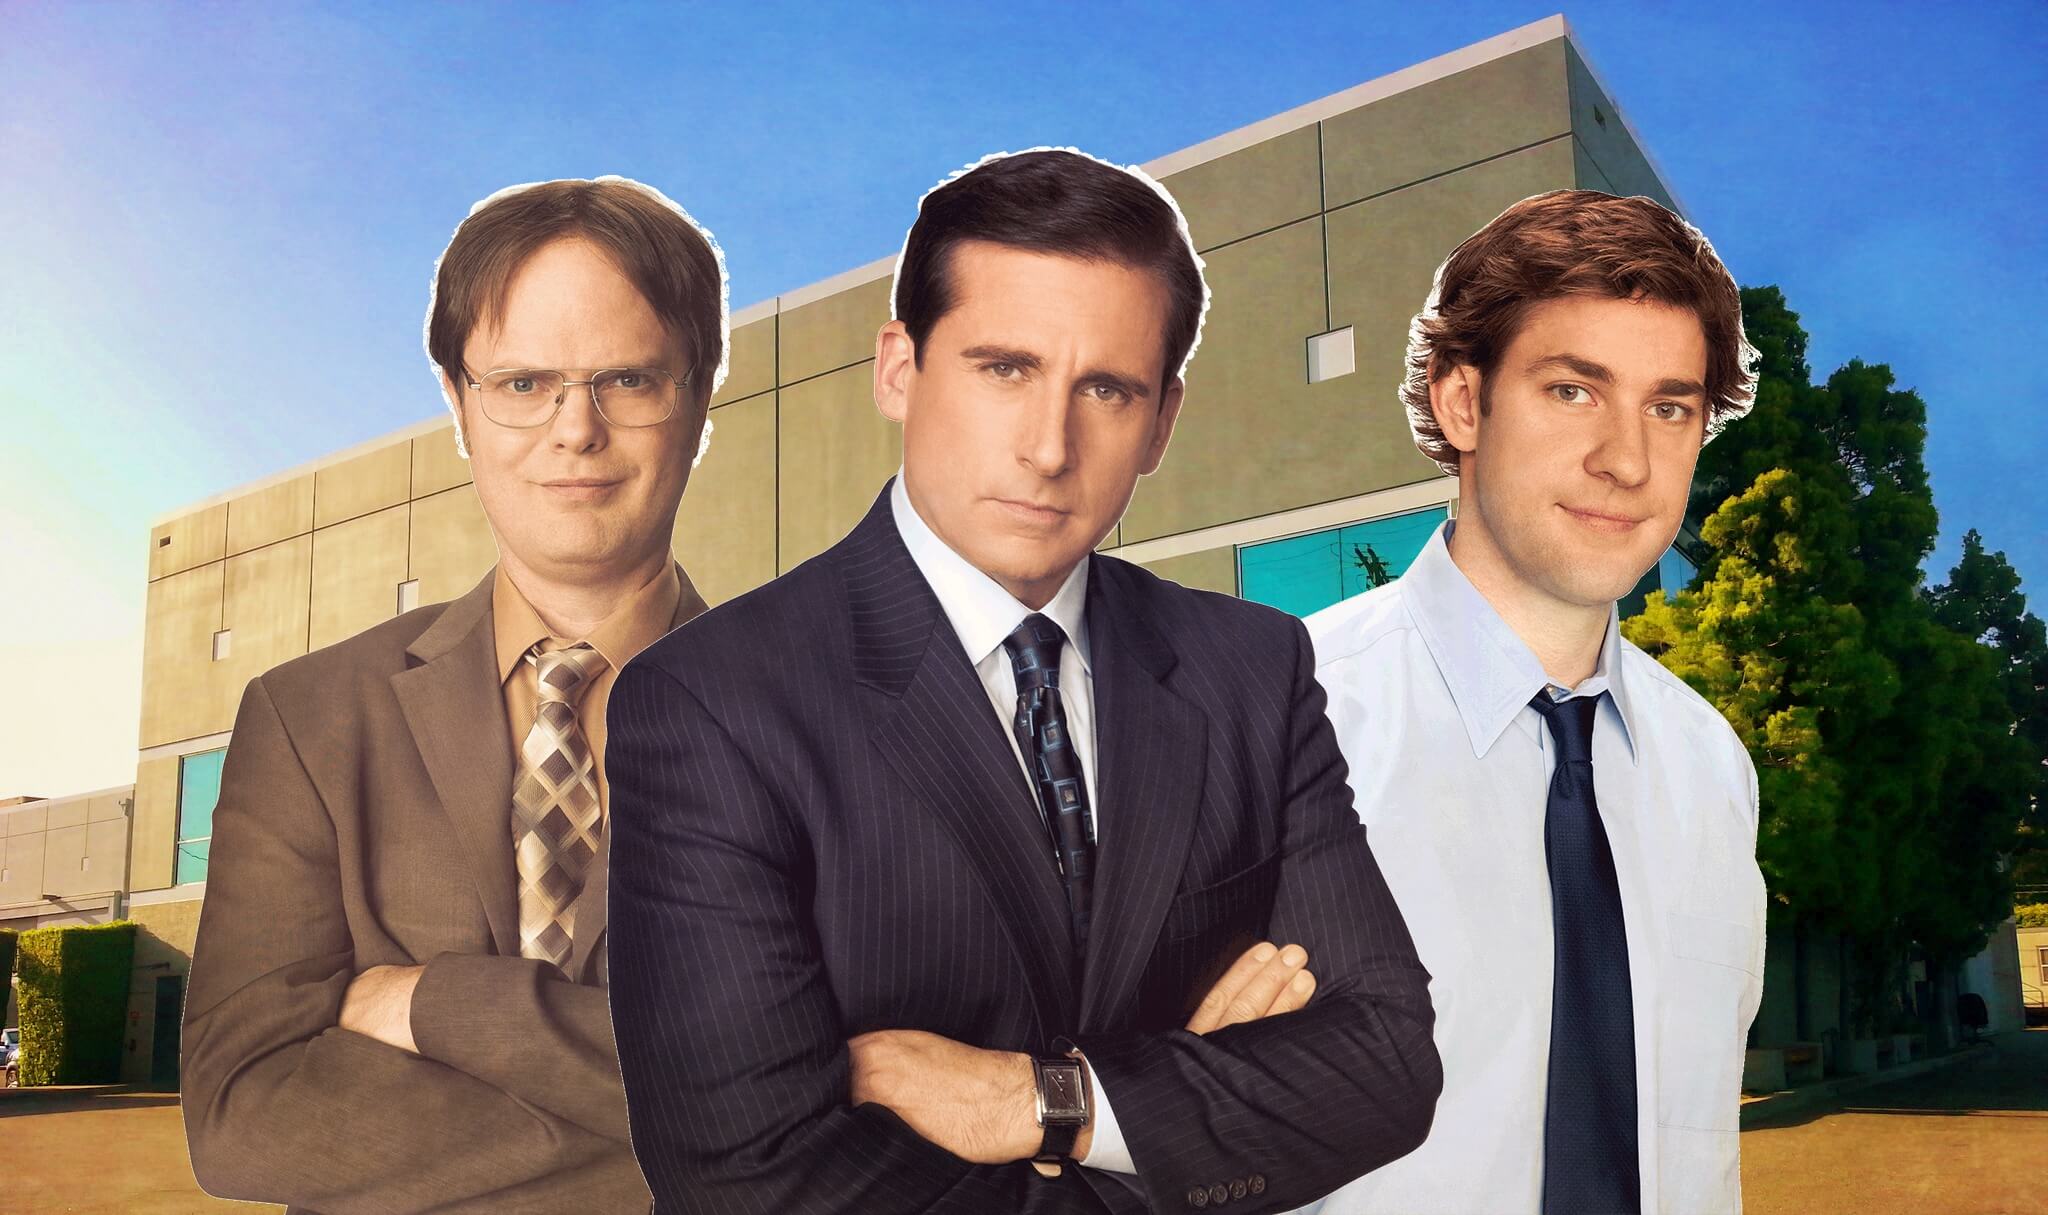 Ranking the top 15 characters on The Office